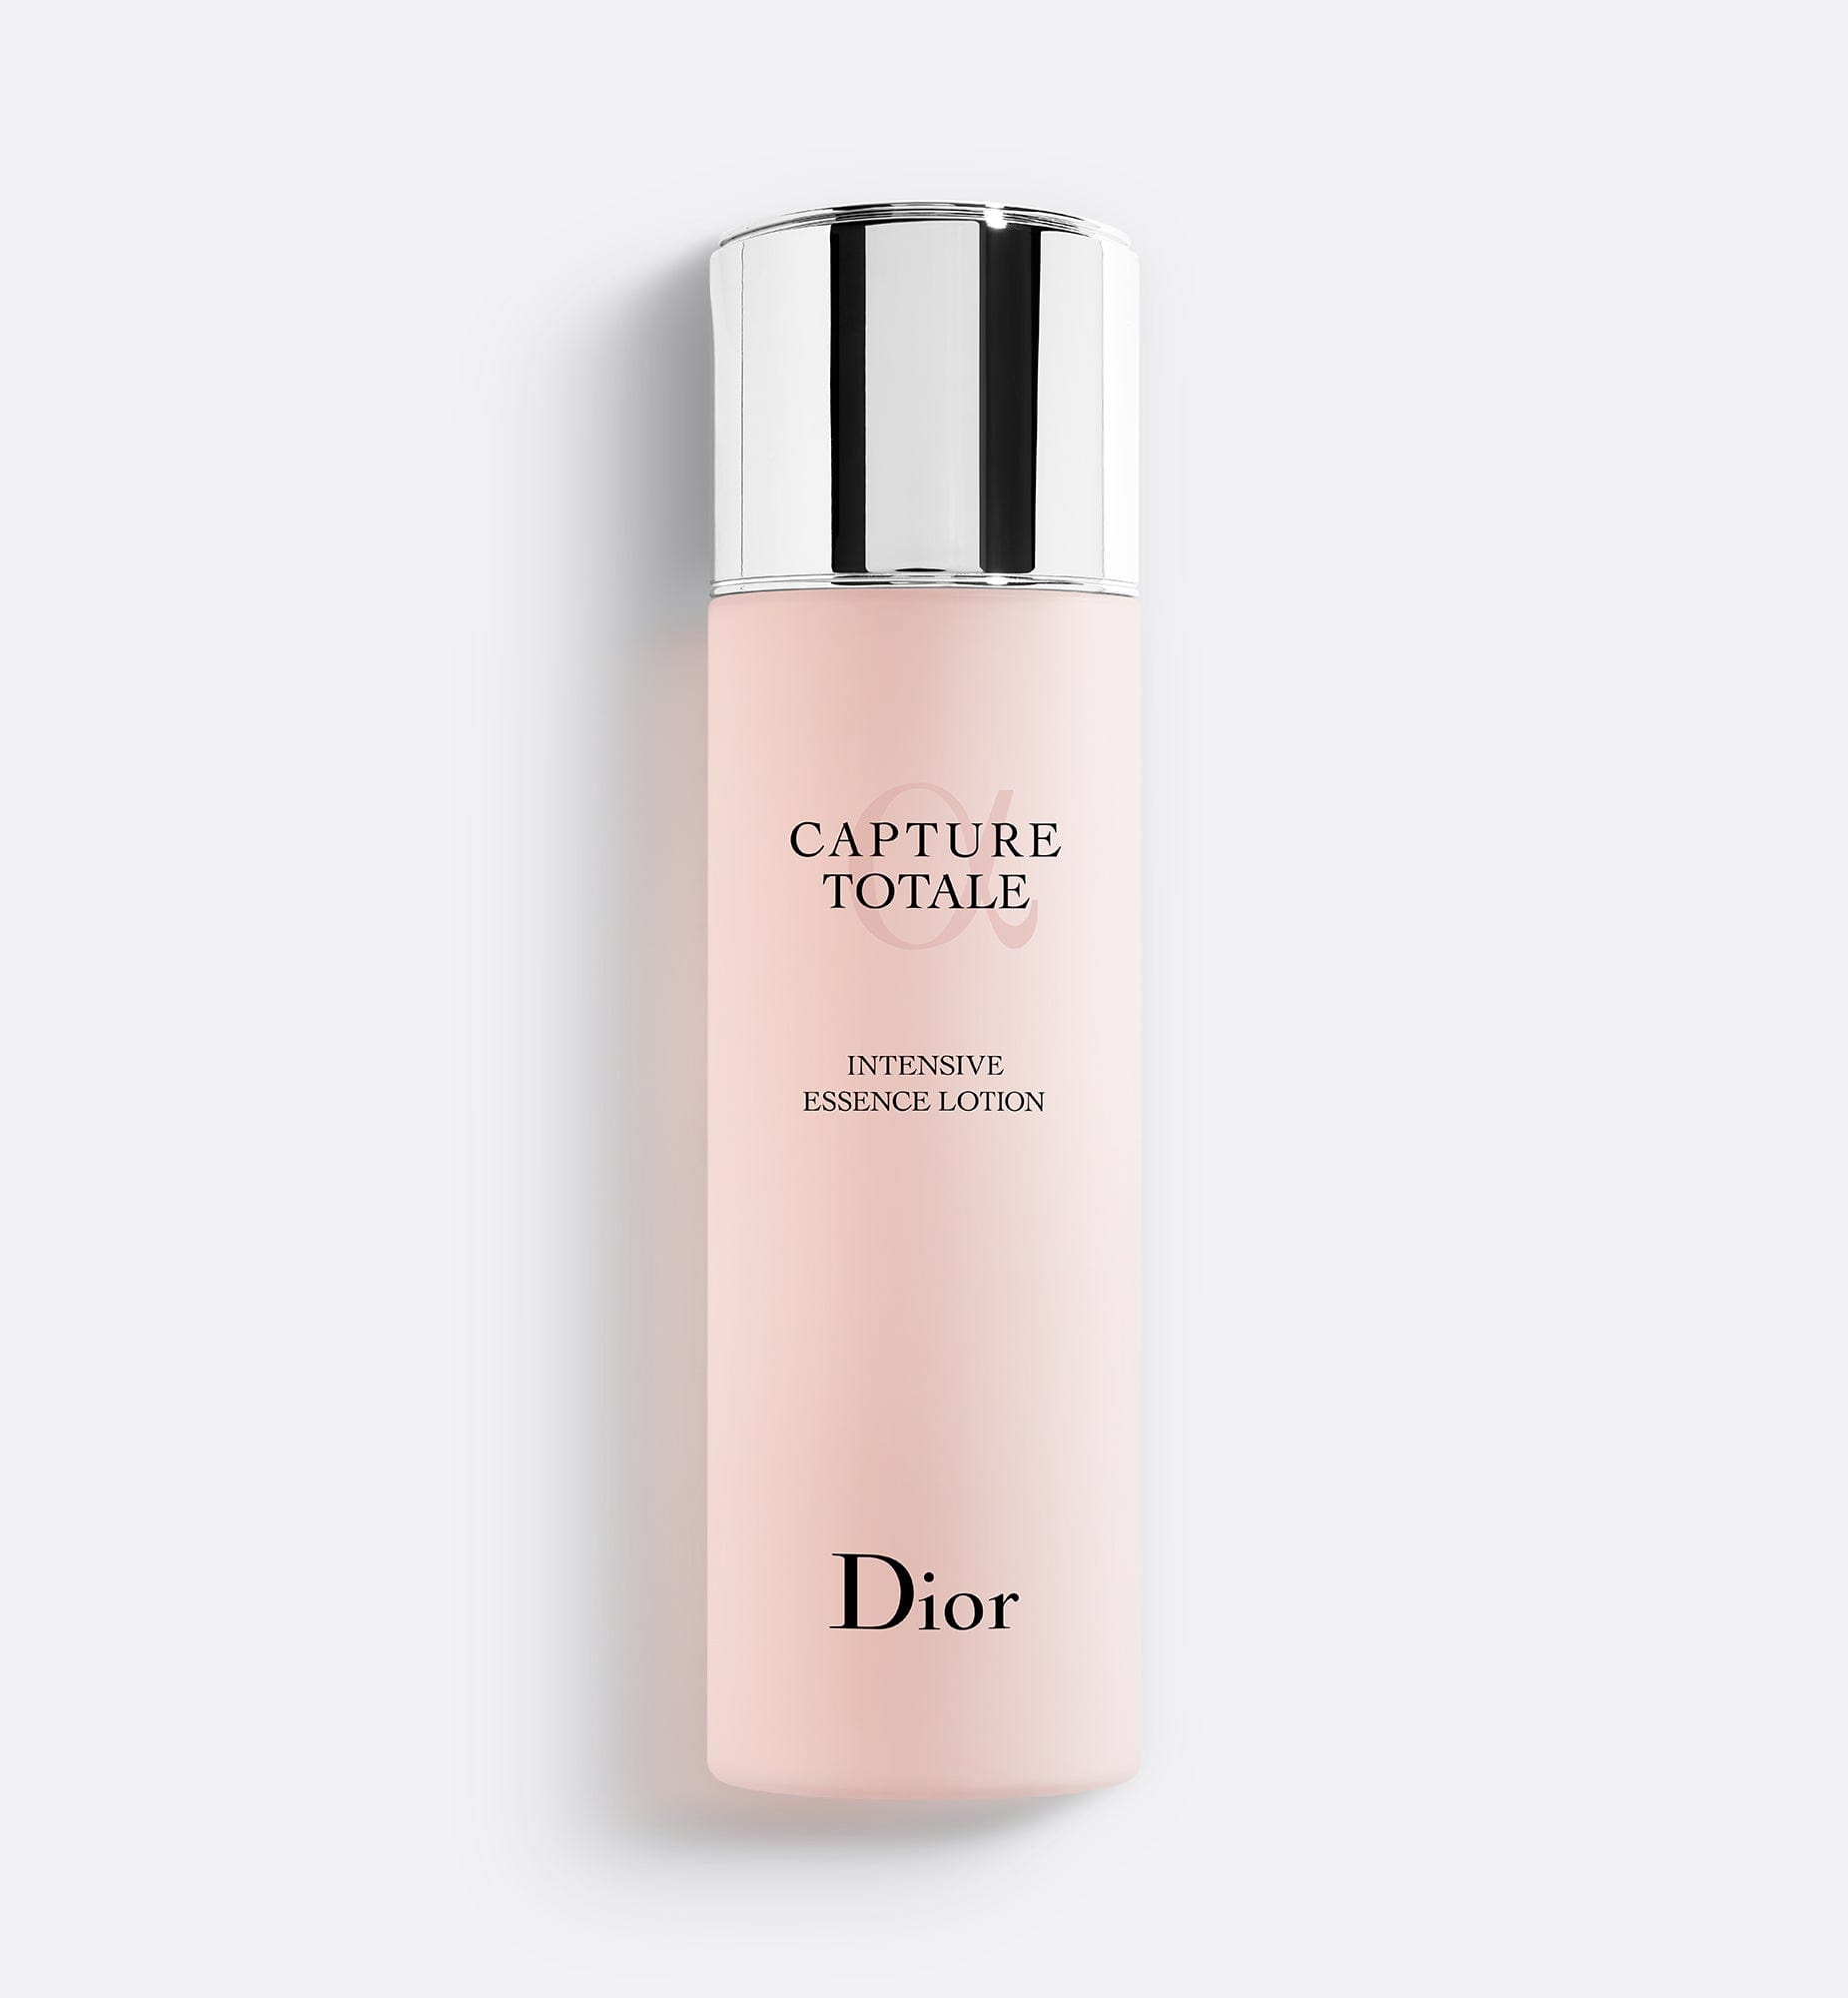 Capture Totale Intensive Essence Lotion | Face Lotion - Intense Preparation - Radiance And Strengthened Skin Barrier